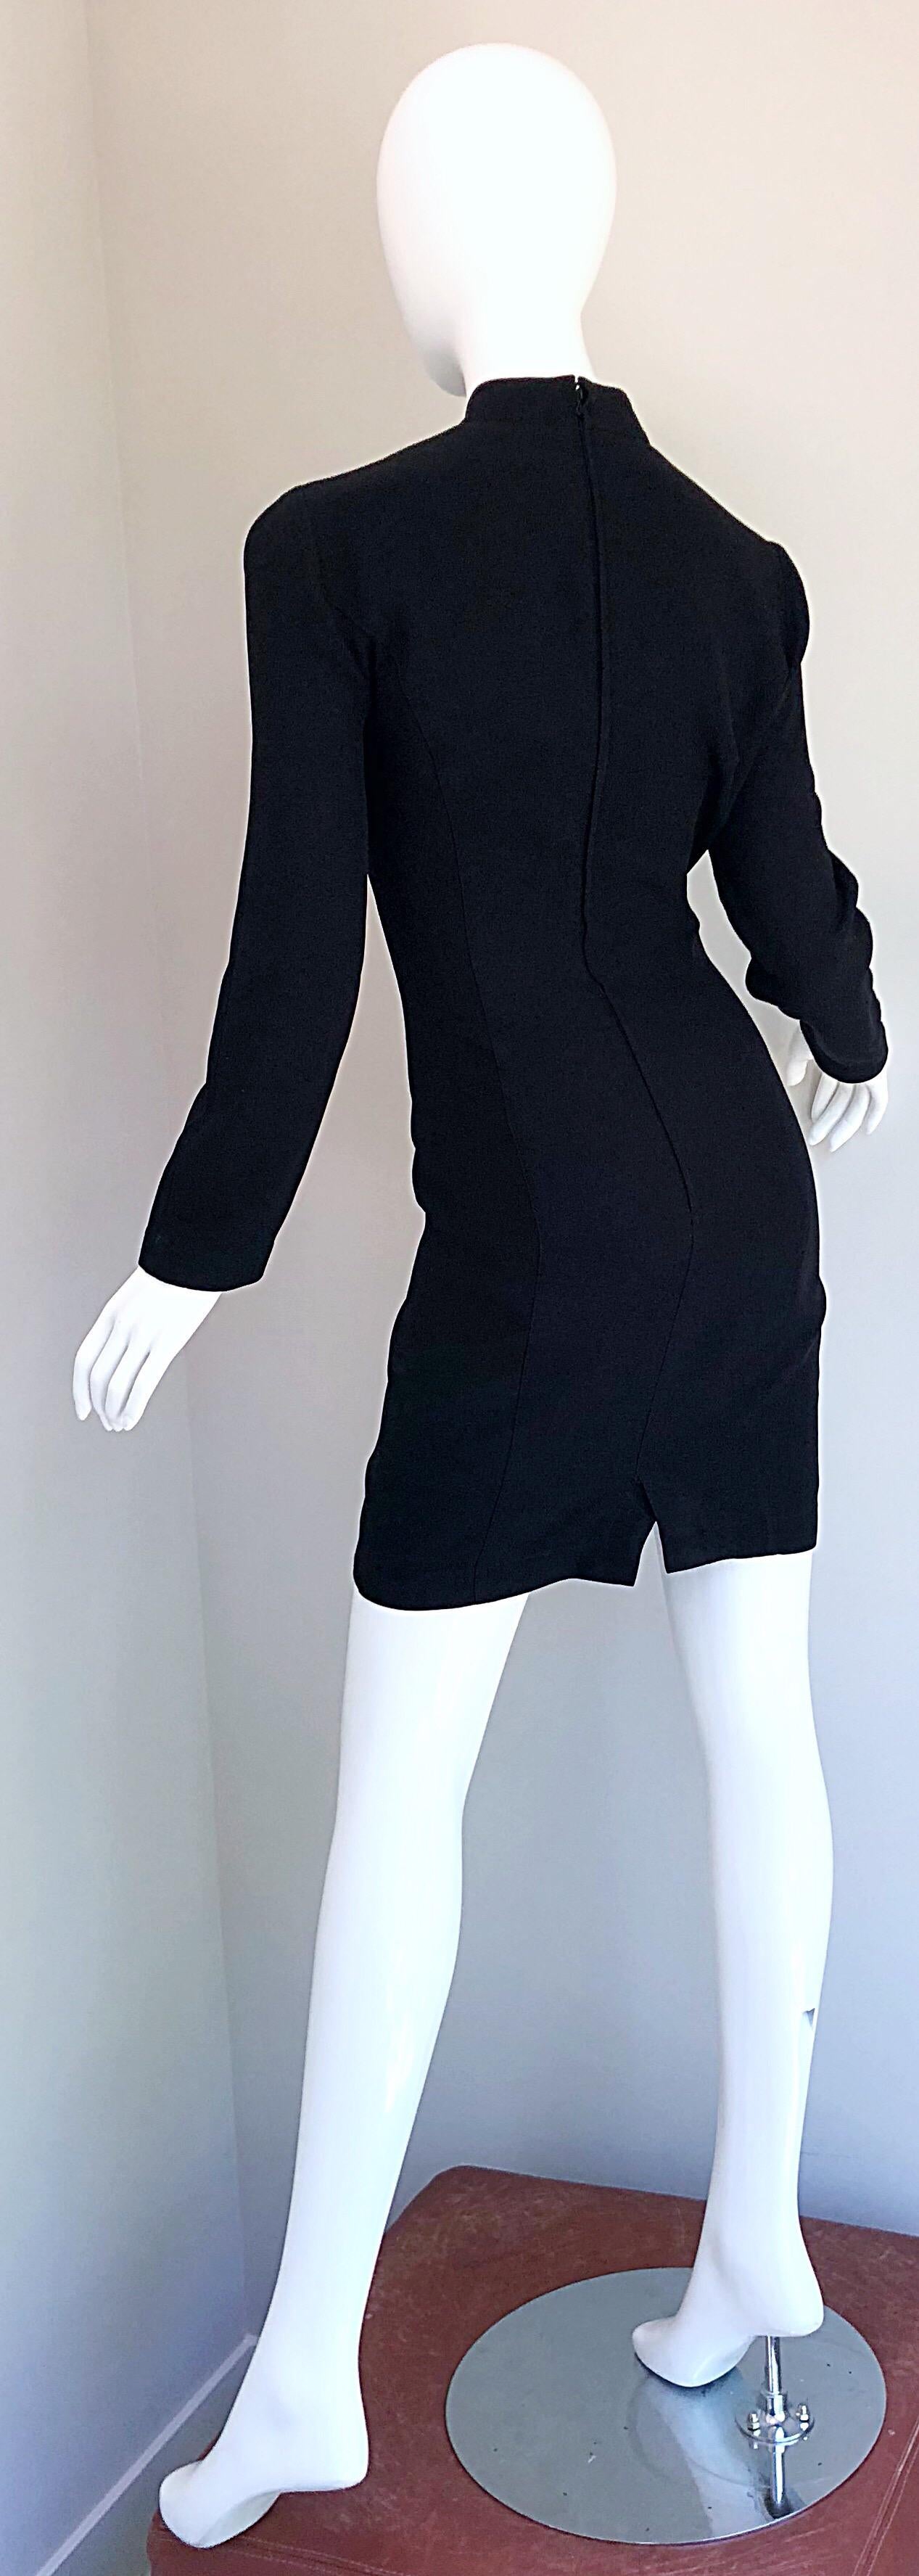 Iconic Vintage Thierry Mugler 80s Bondage Inspired Cut - Out Black 1980s Dress For Sale 3